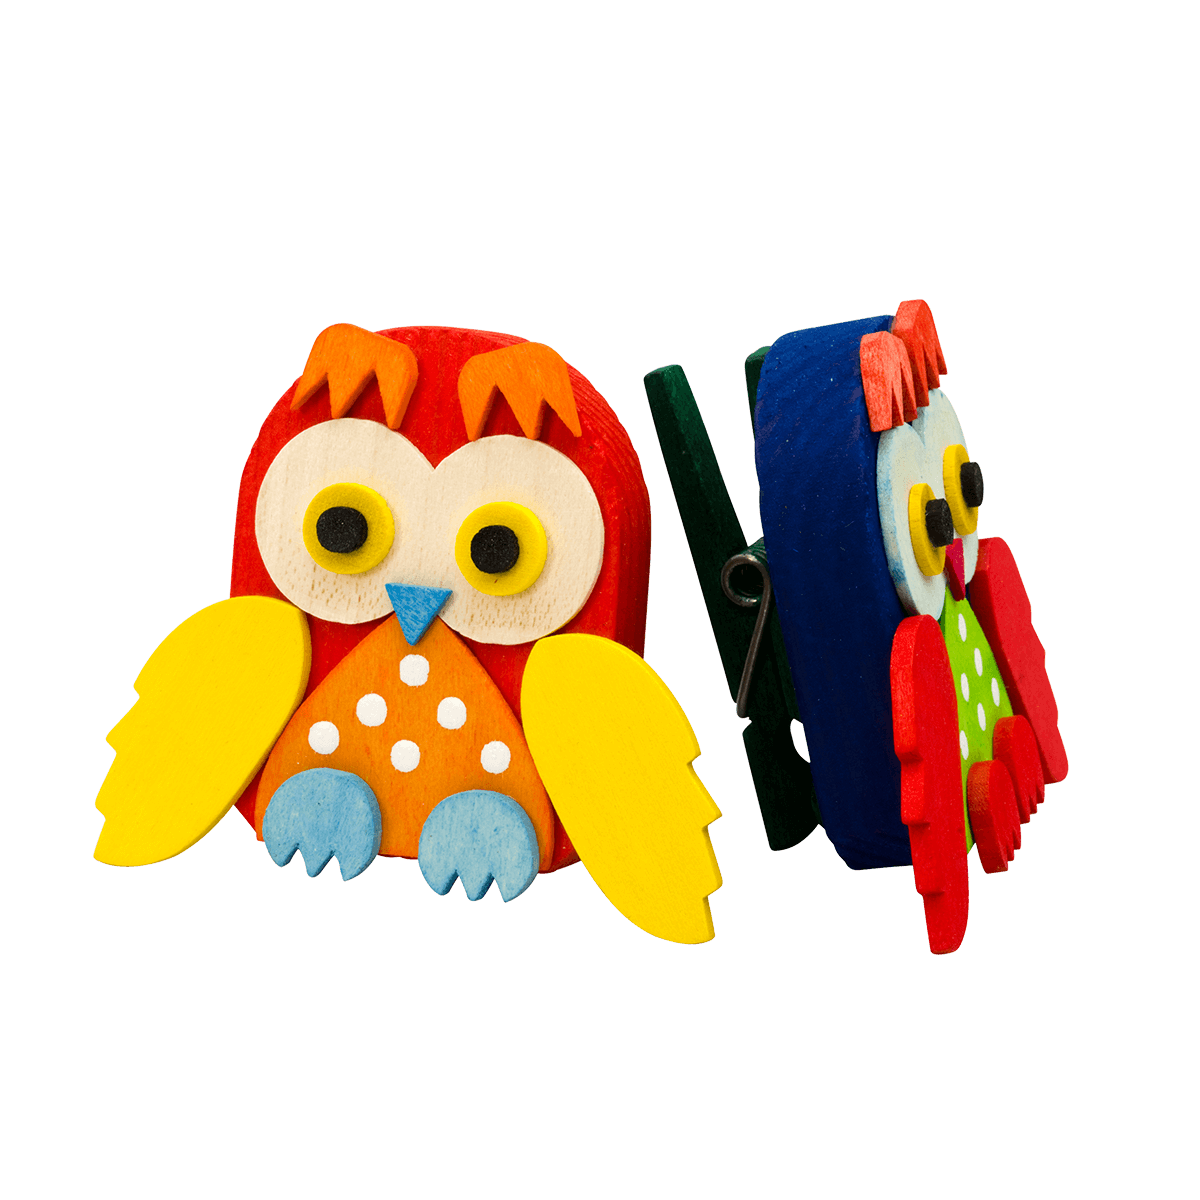 Owl with clip